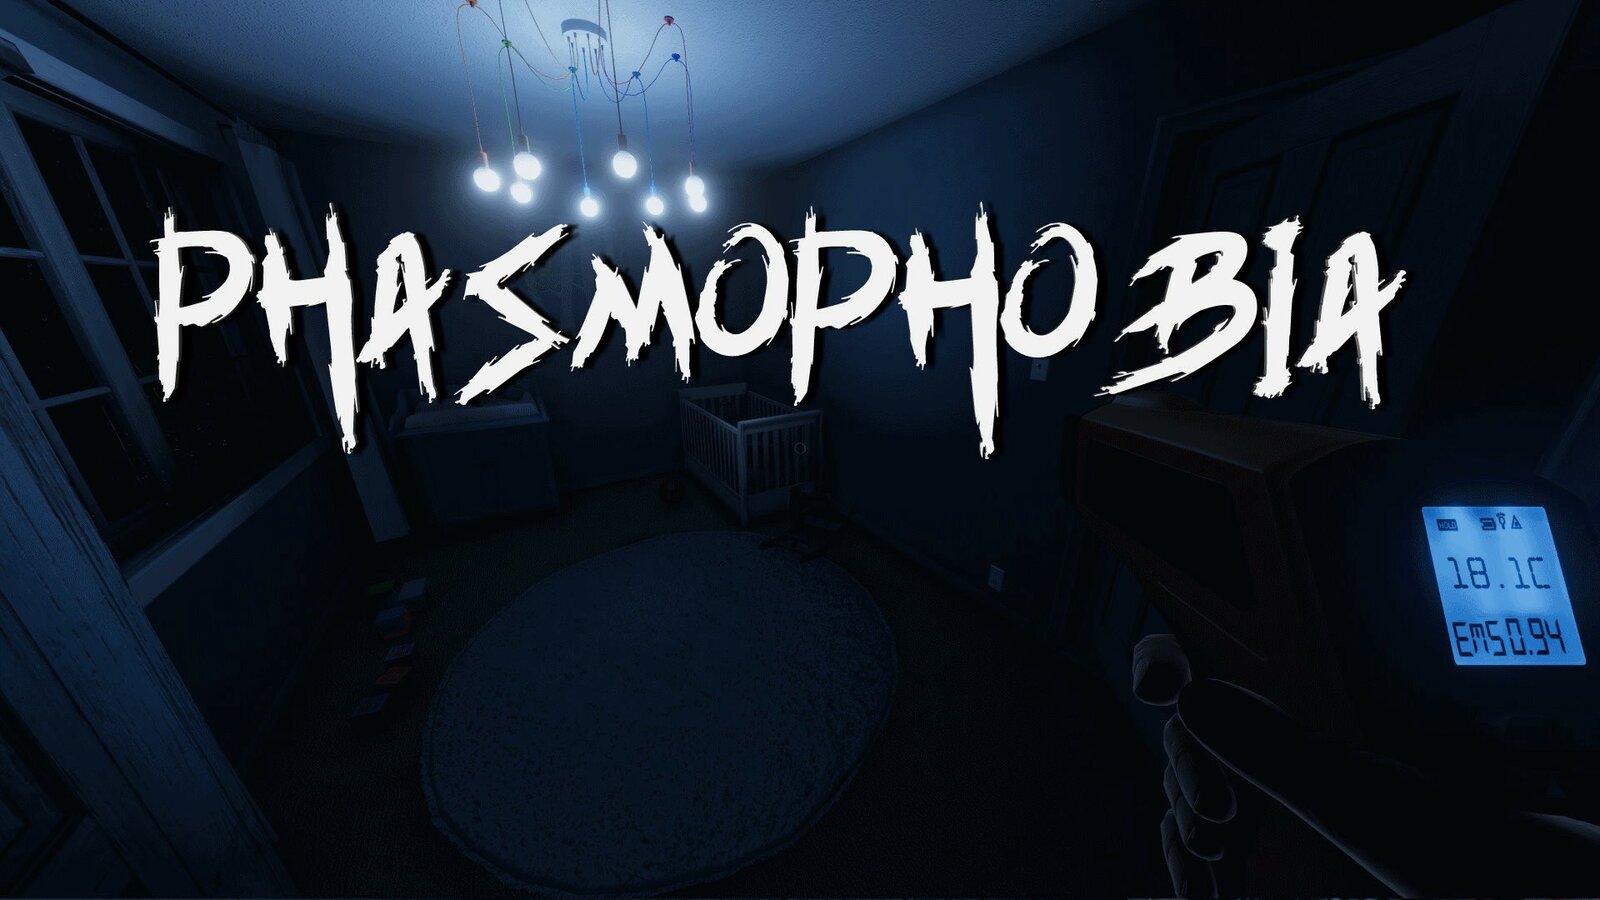 Ghost event phasmophobia фото 9